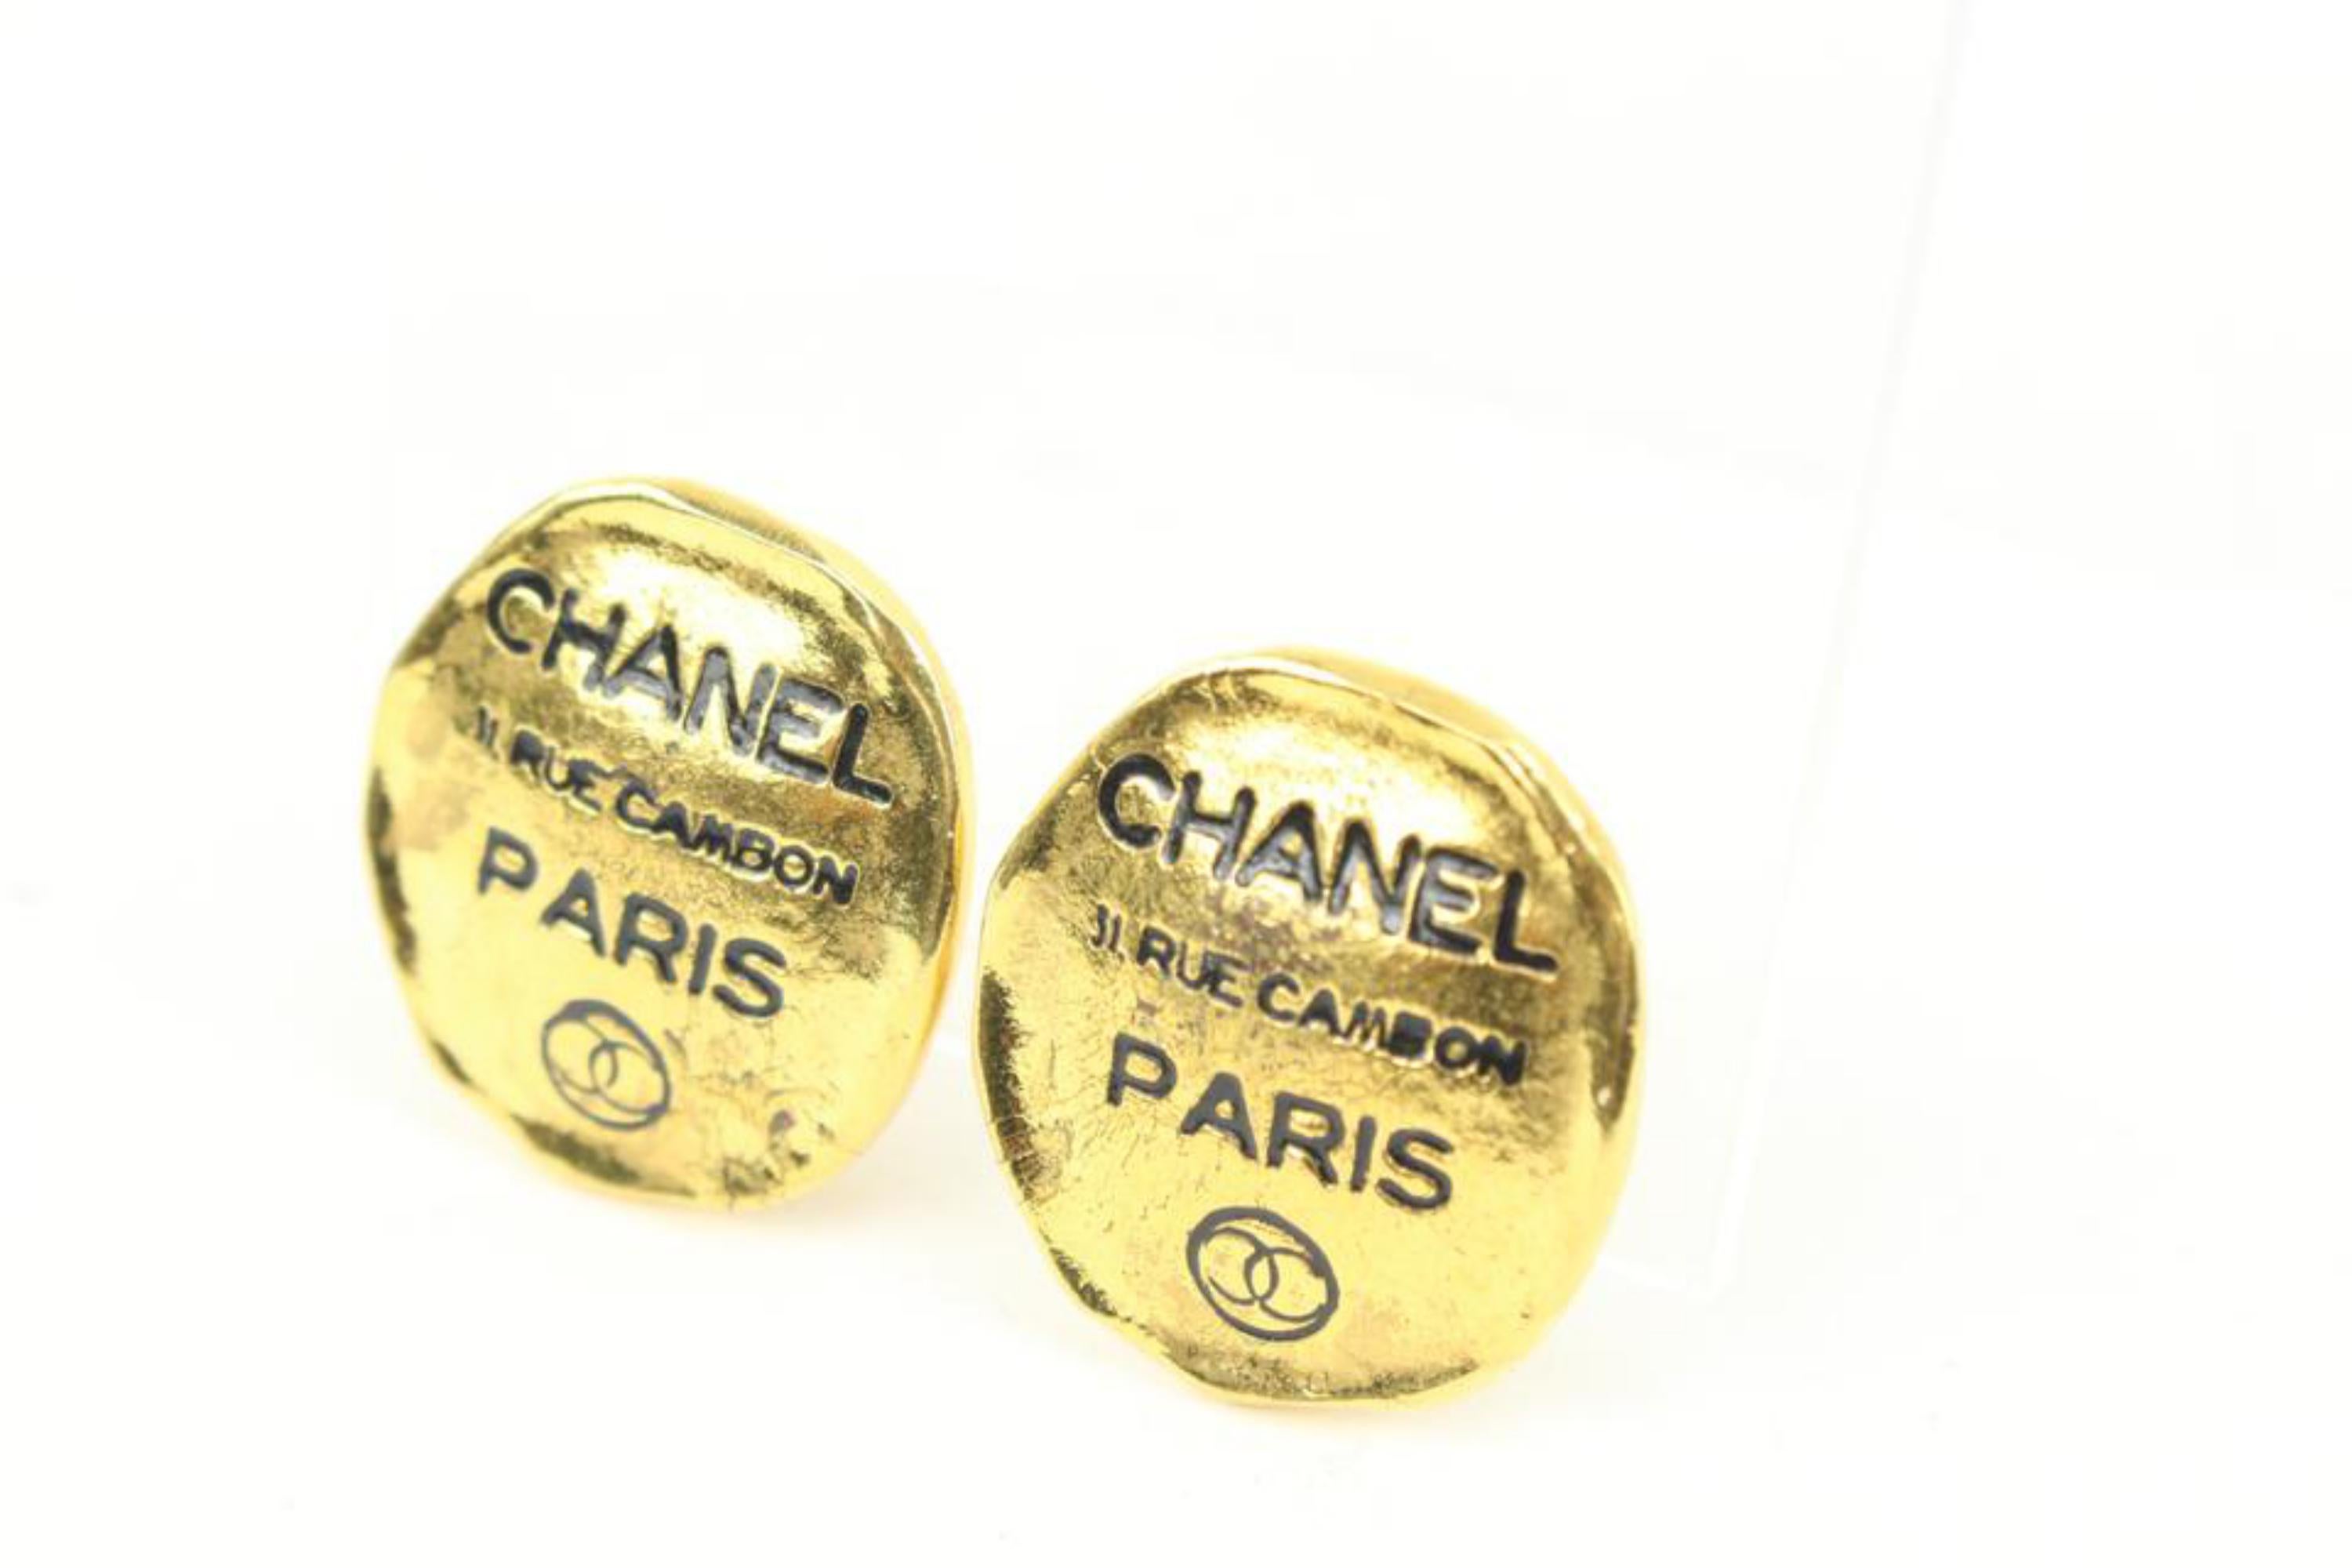 Chanel 1980's Hammered Gold 31 Rue Cambon Paris Earrings 71cz418s 6